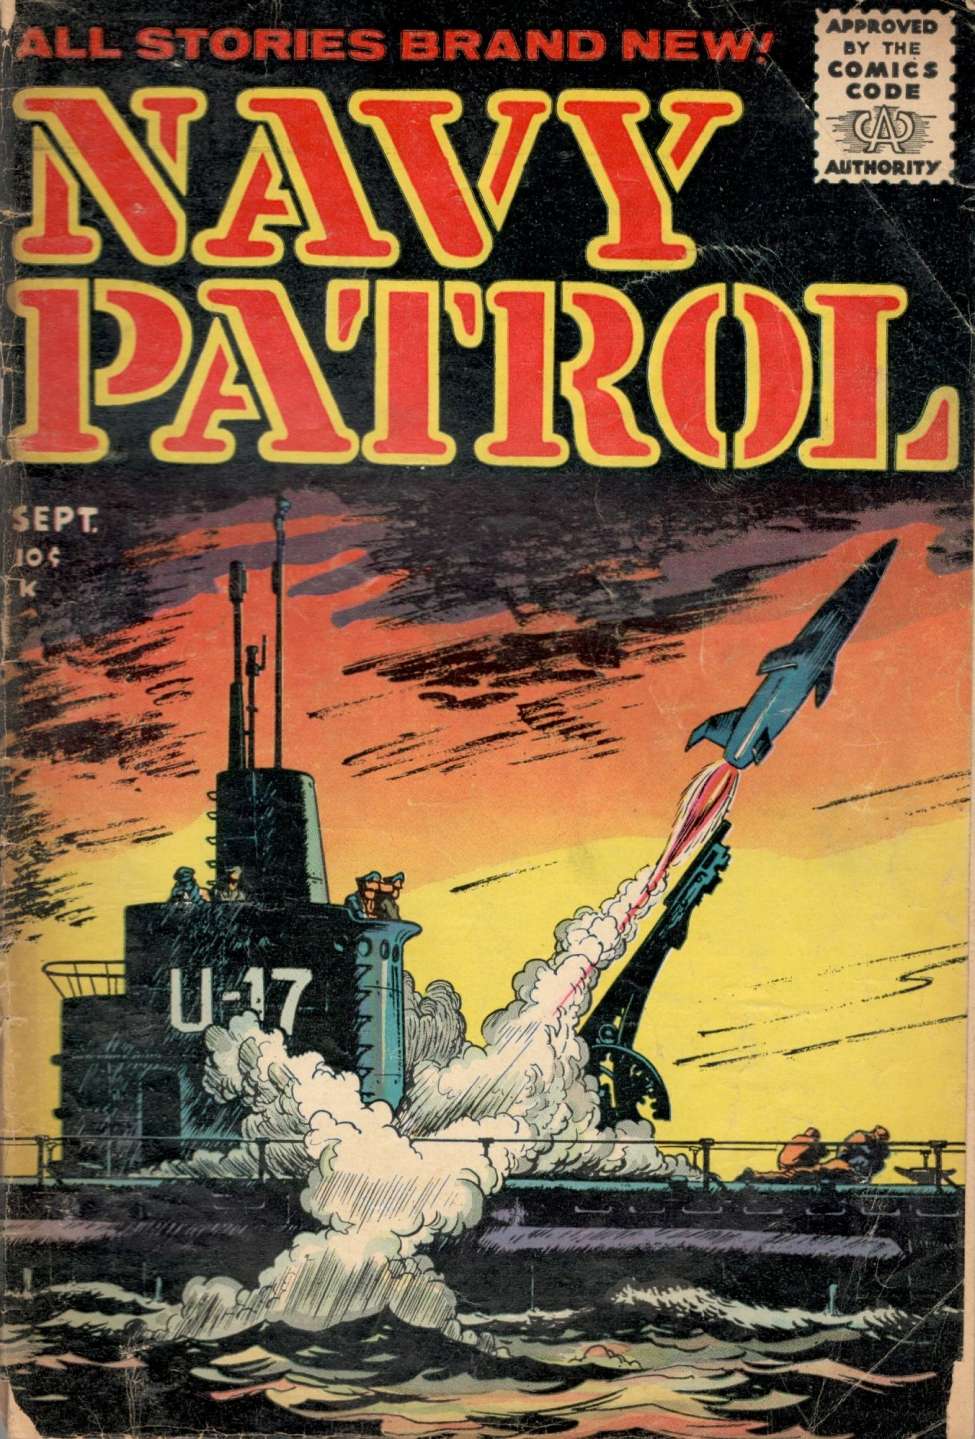 Book Cover For Navy Patrol 3